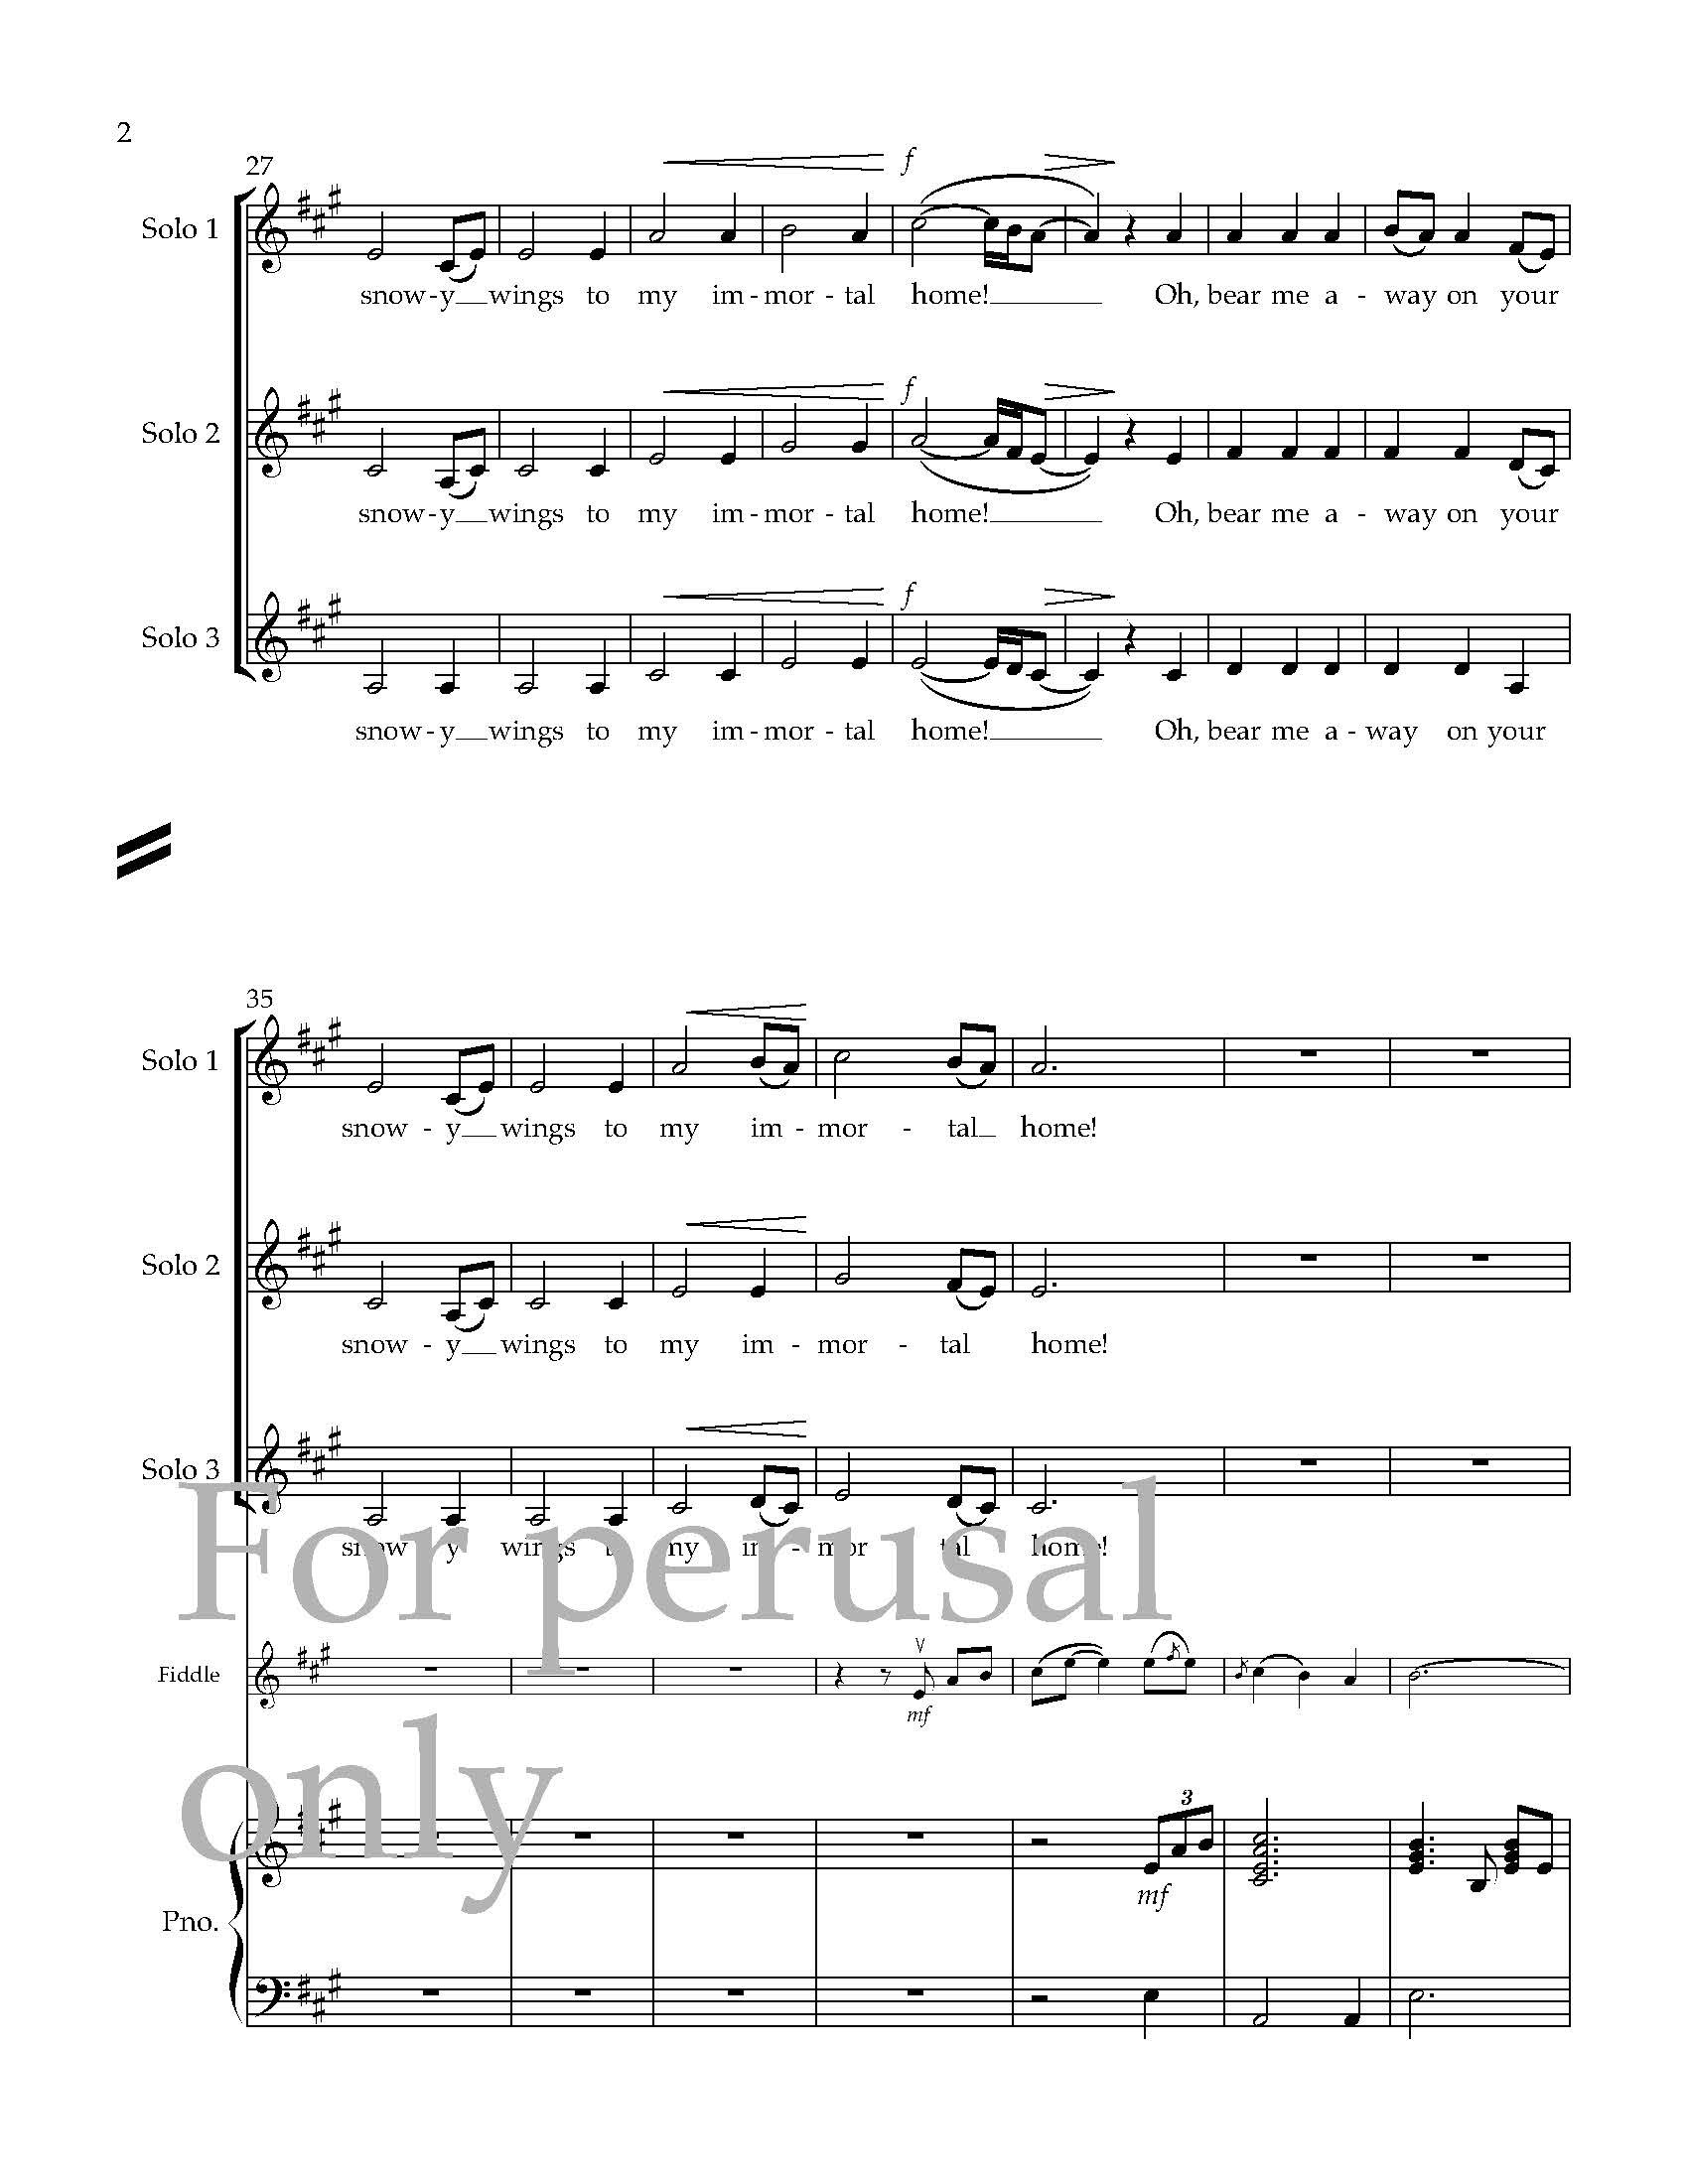 VOCAL SCORE  preview- Angel Band for three-part choir, piano, fiddle, guitar, string bass - arr. Ryan James Brandau_Page_04.jpg